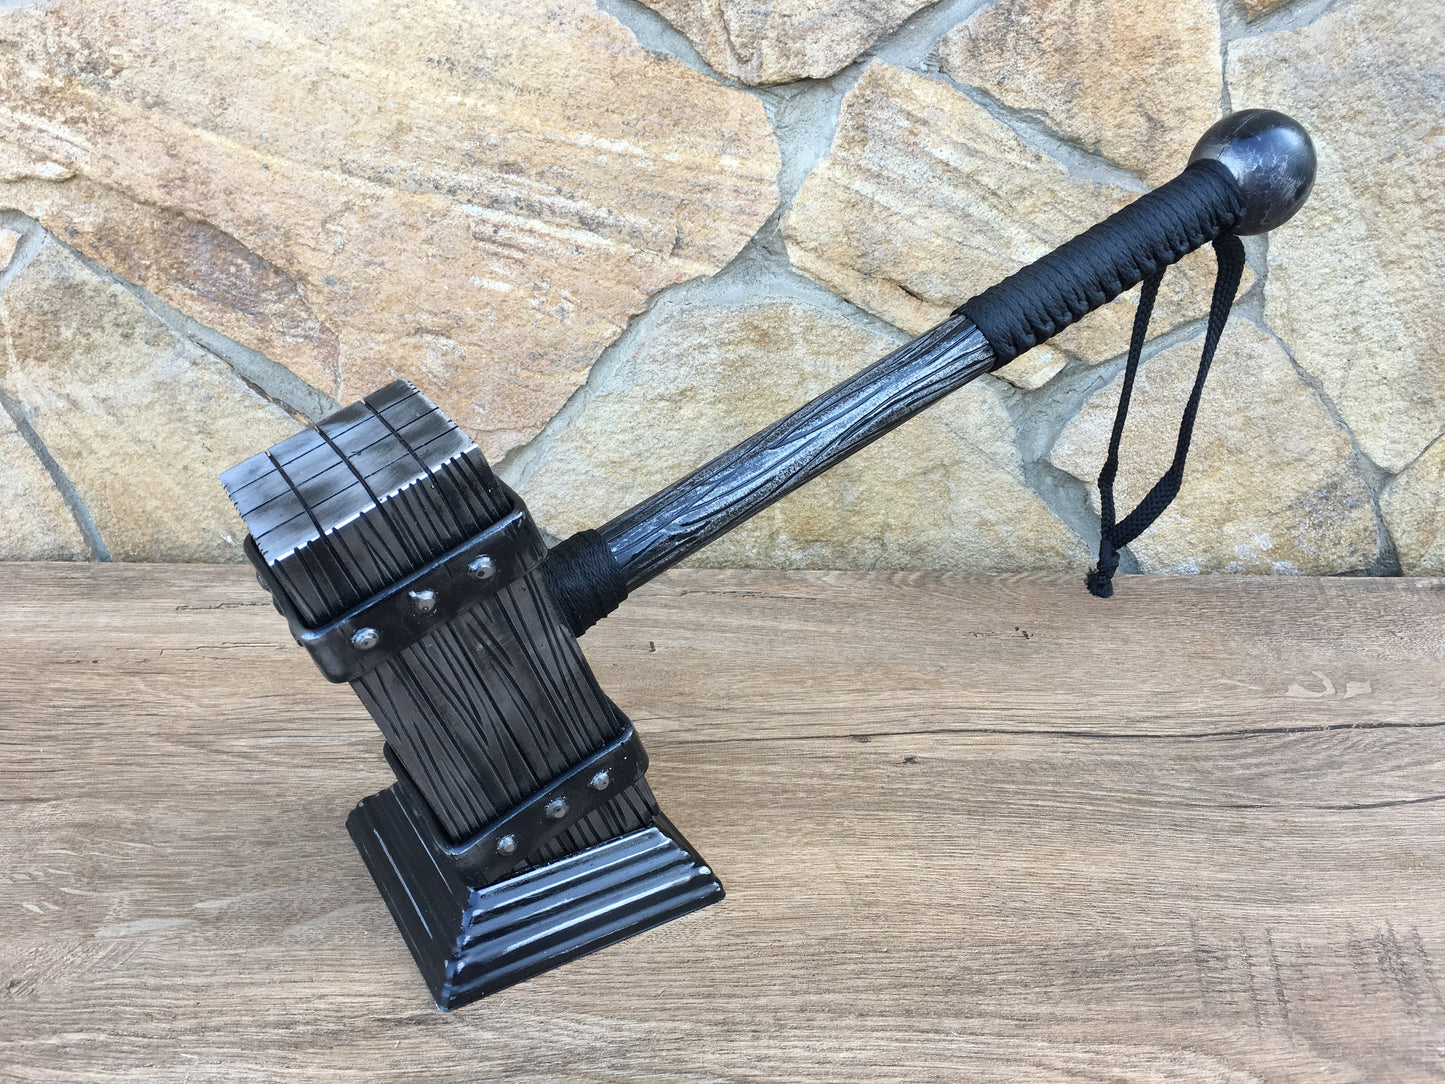 Hammer, unique hammer, viking tools, home decor, Christmas gift, viking hammer, mens gift, iron gift for him, military gift, iron gifts